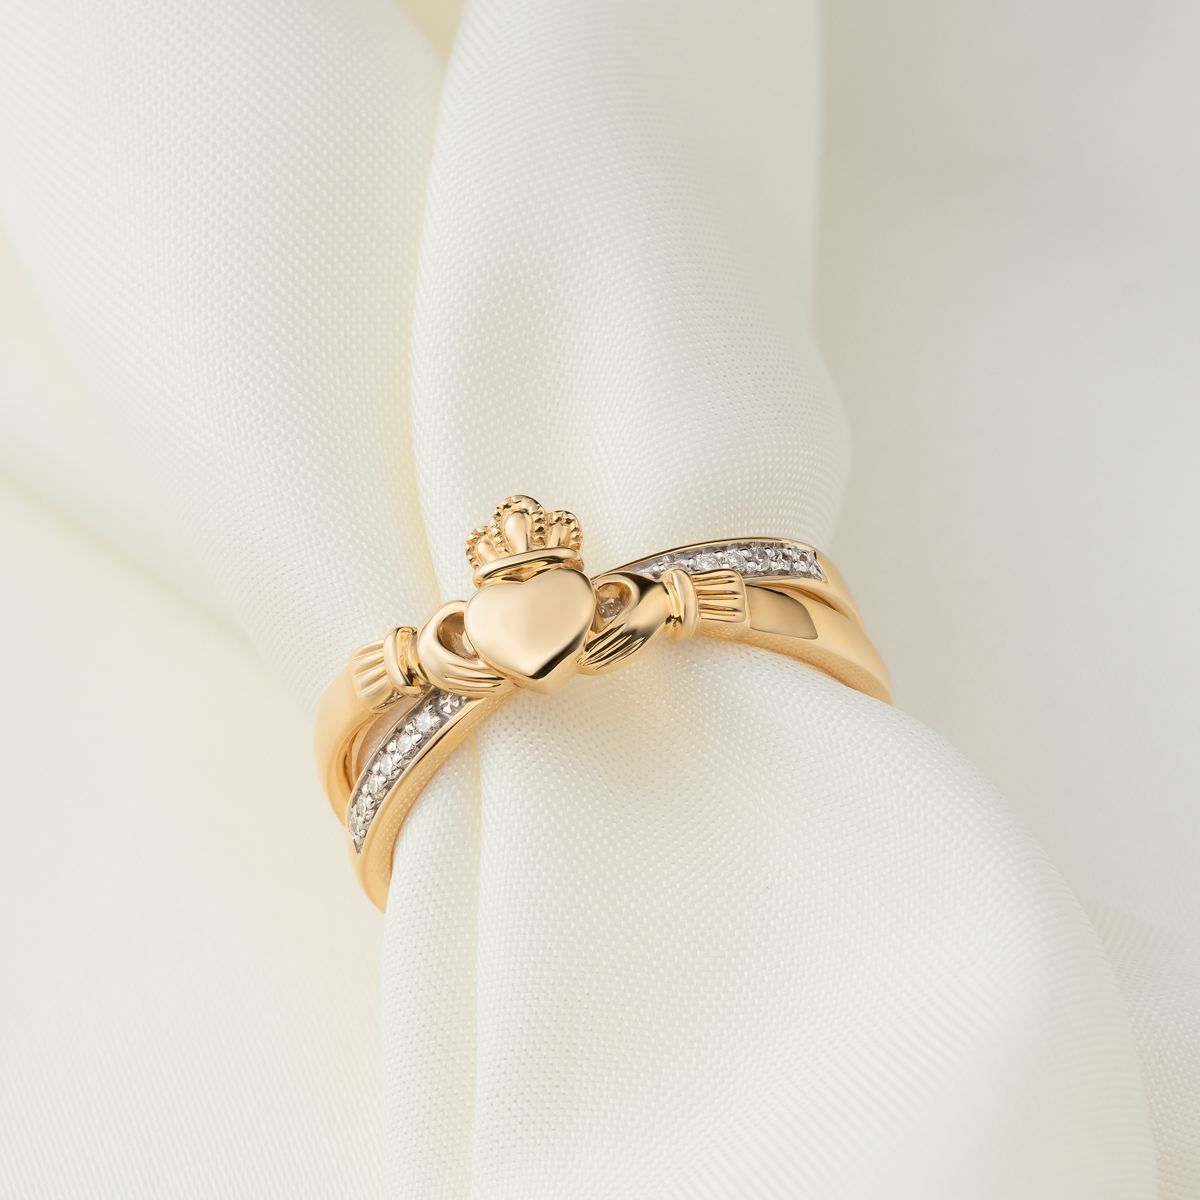 Product image for Irish Rings | 14k Gold Ladies Diamond Crossover Claddagh Ring